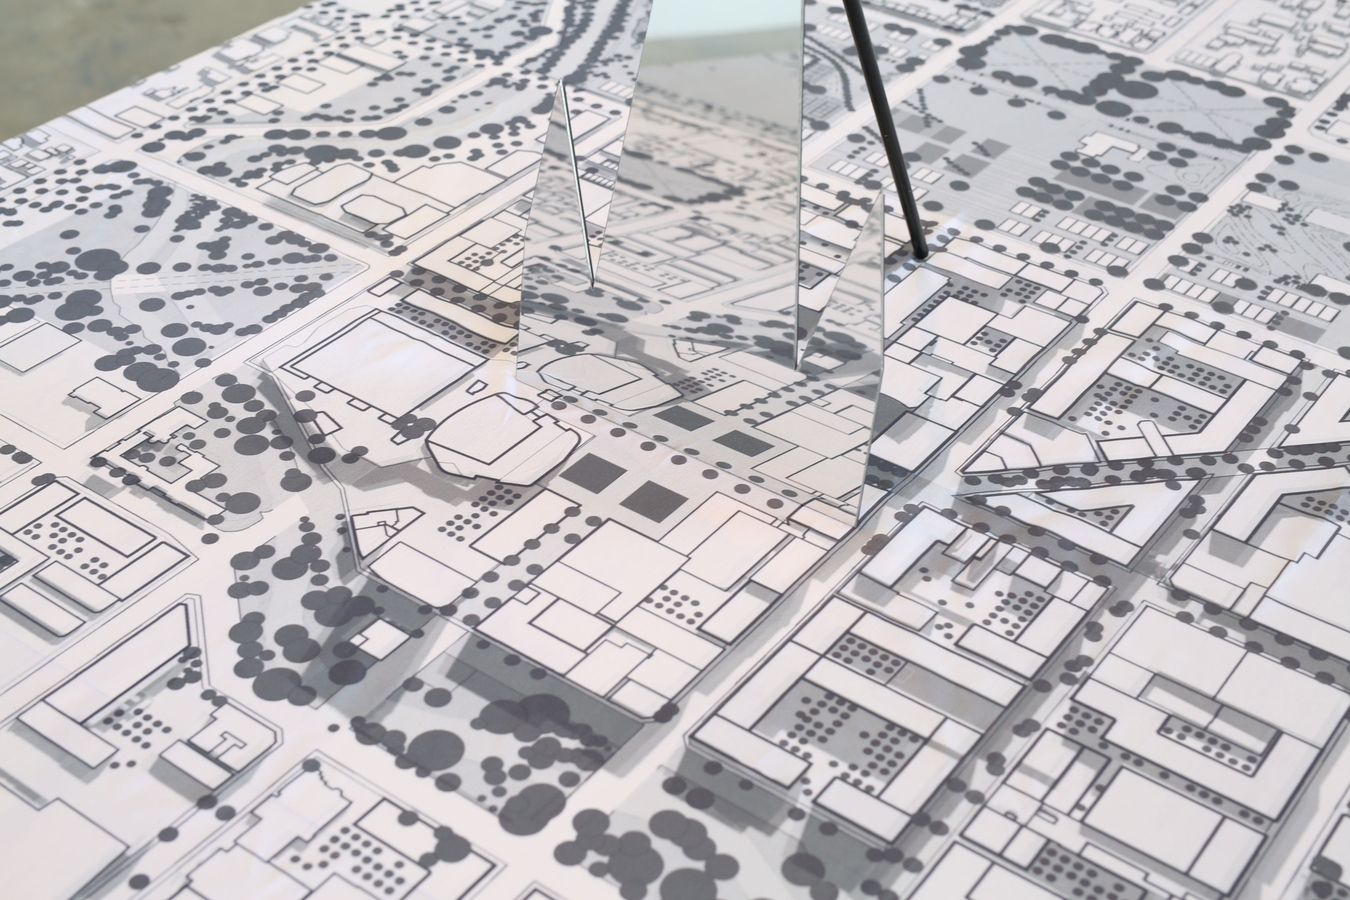 Matthew Galloway, Out of the Shadows (detail), 2016, map derived from the CCDU Blueprint, designed by Warren and Mahoney for the Christchurch City Council in 2012. Image: Daegan Wells.